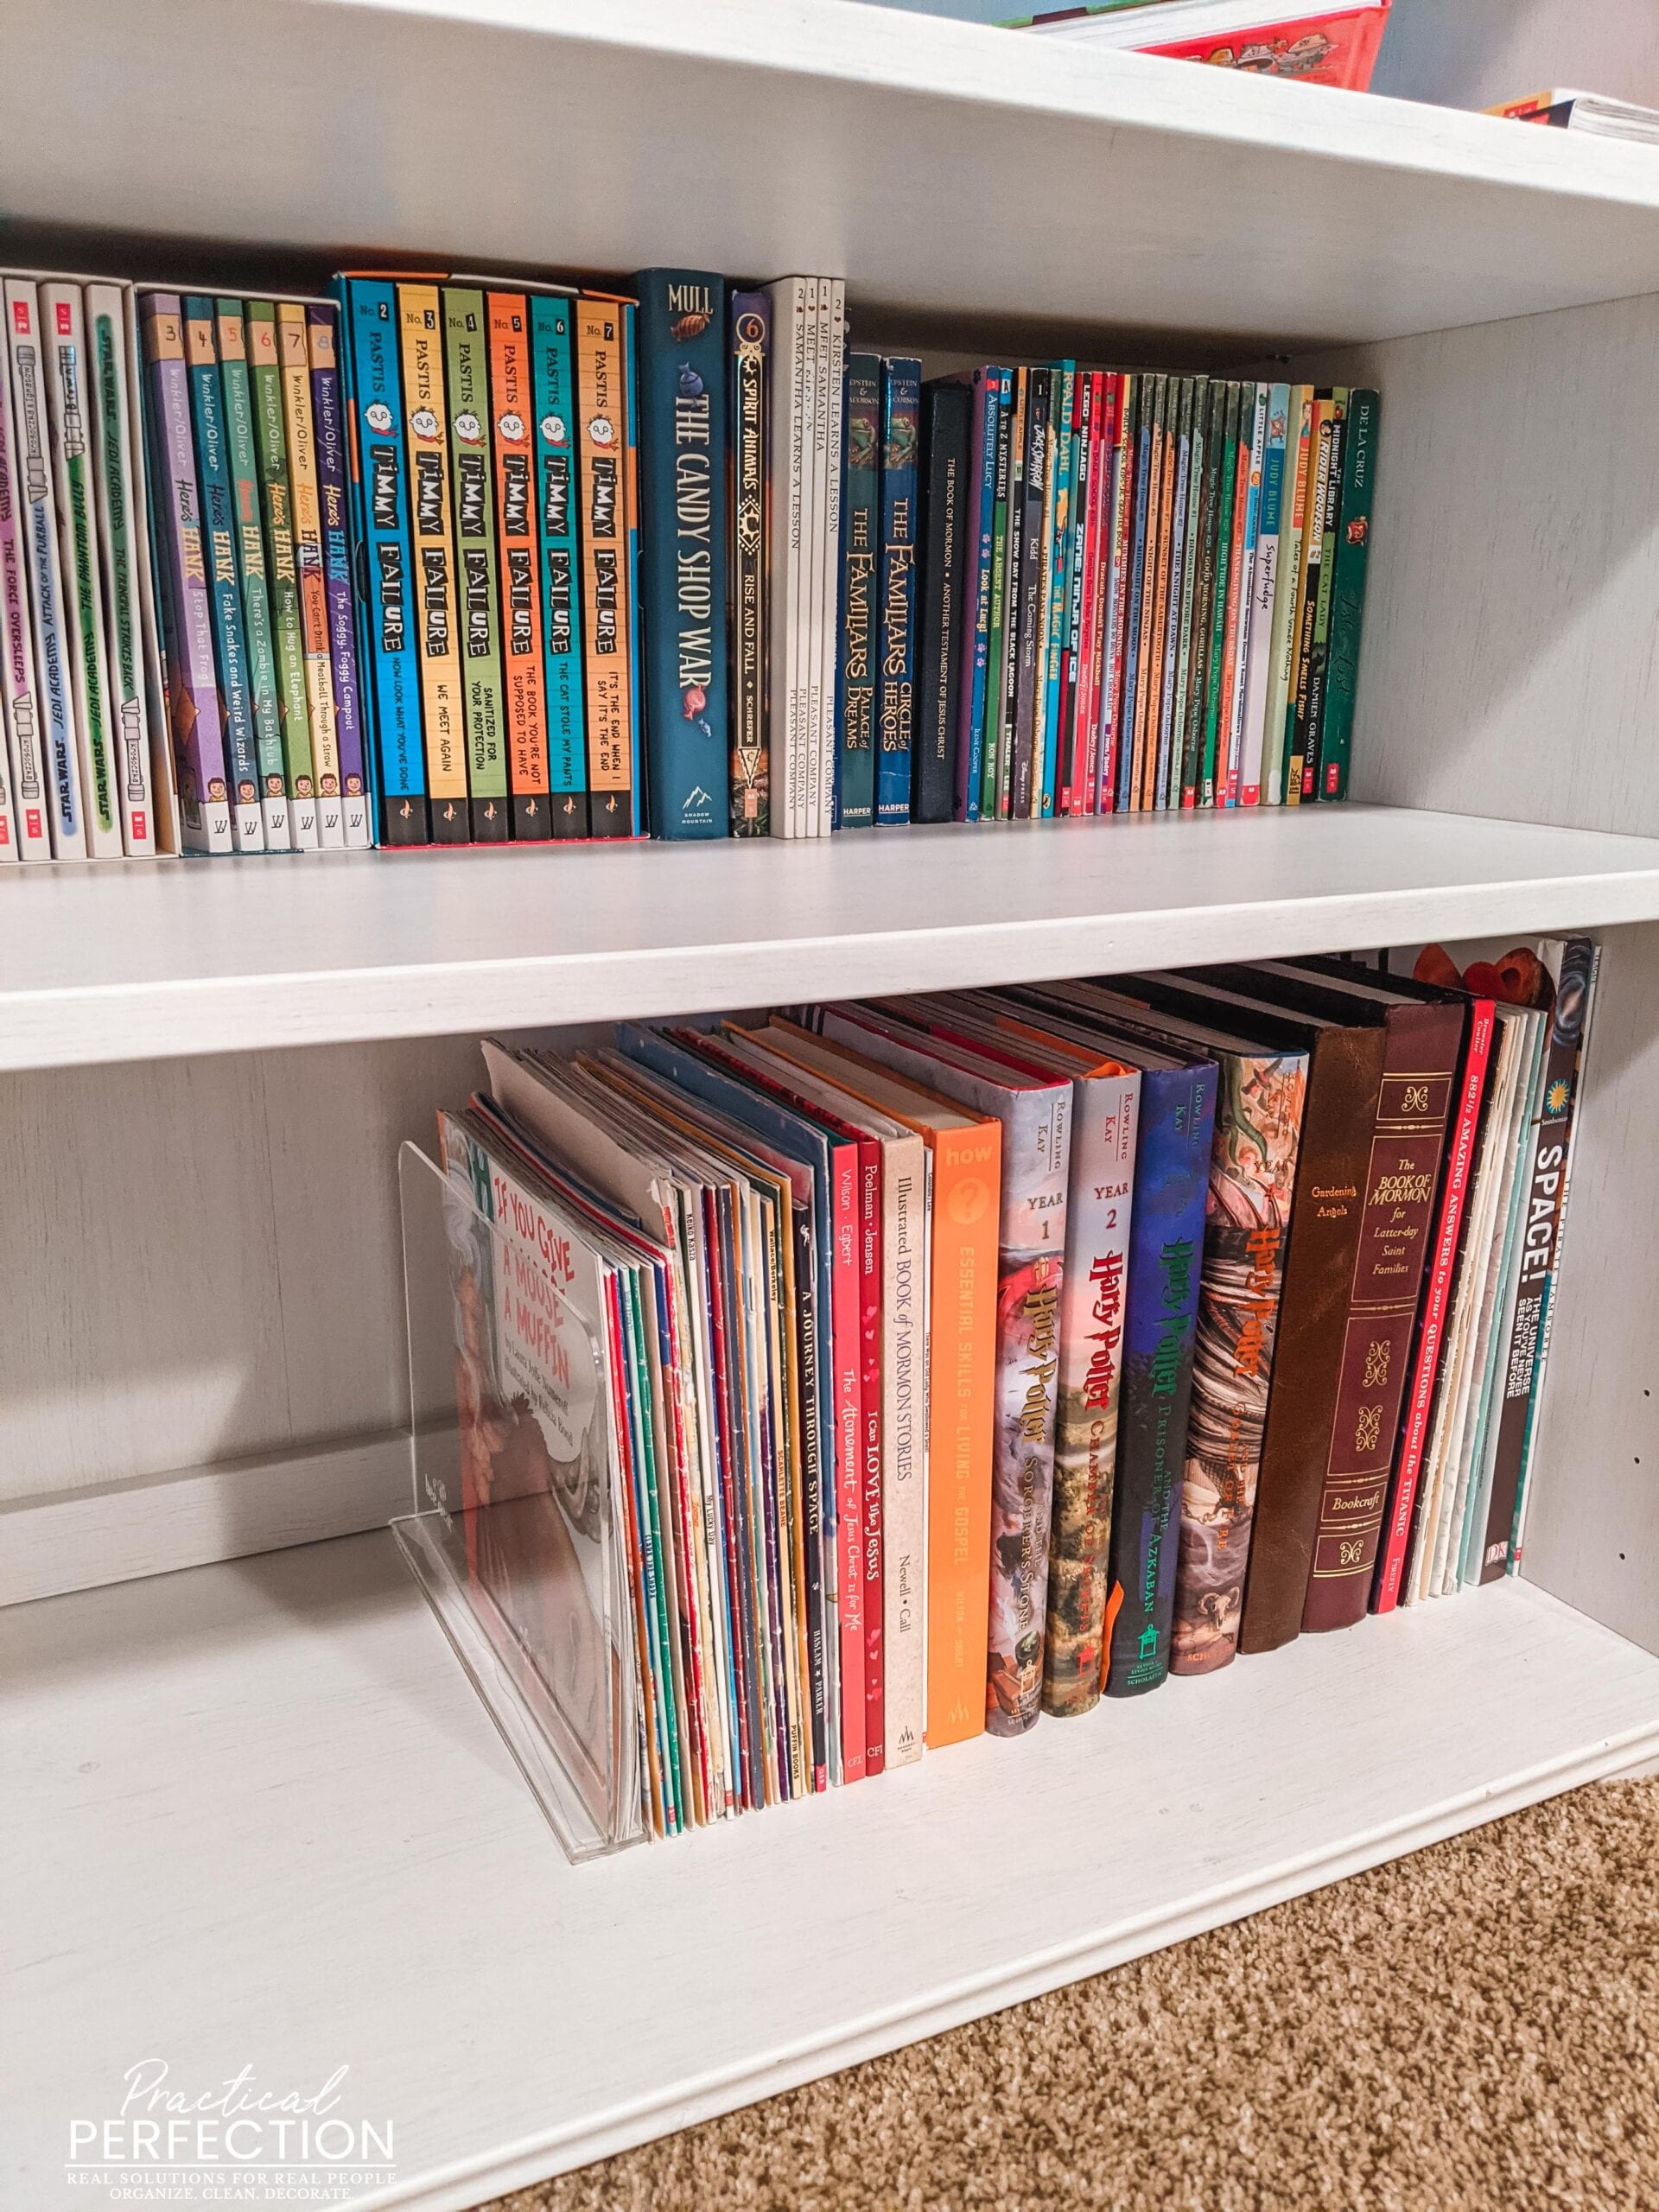 12 Awesome Ways You Can Use Acrylic Shelf Dividers to Organize Your Home -  Practical Perfection